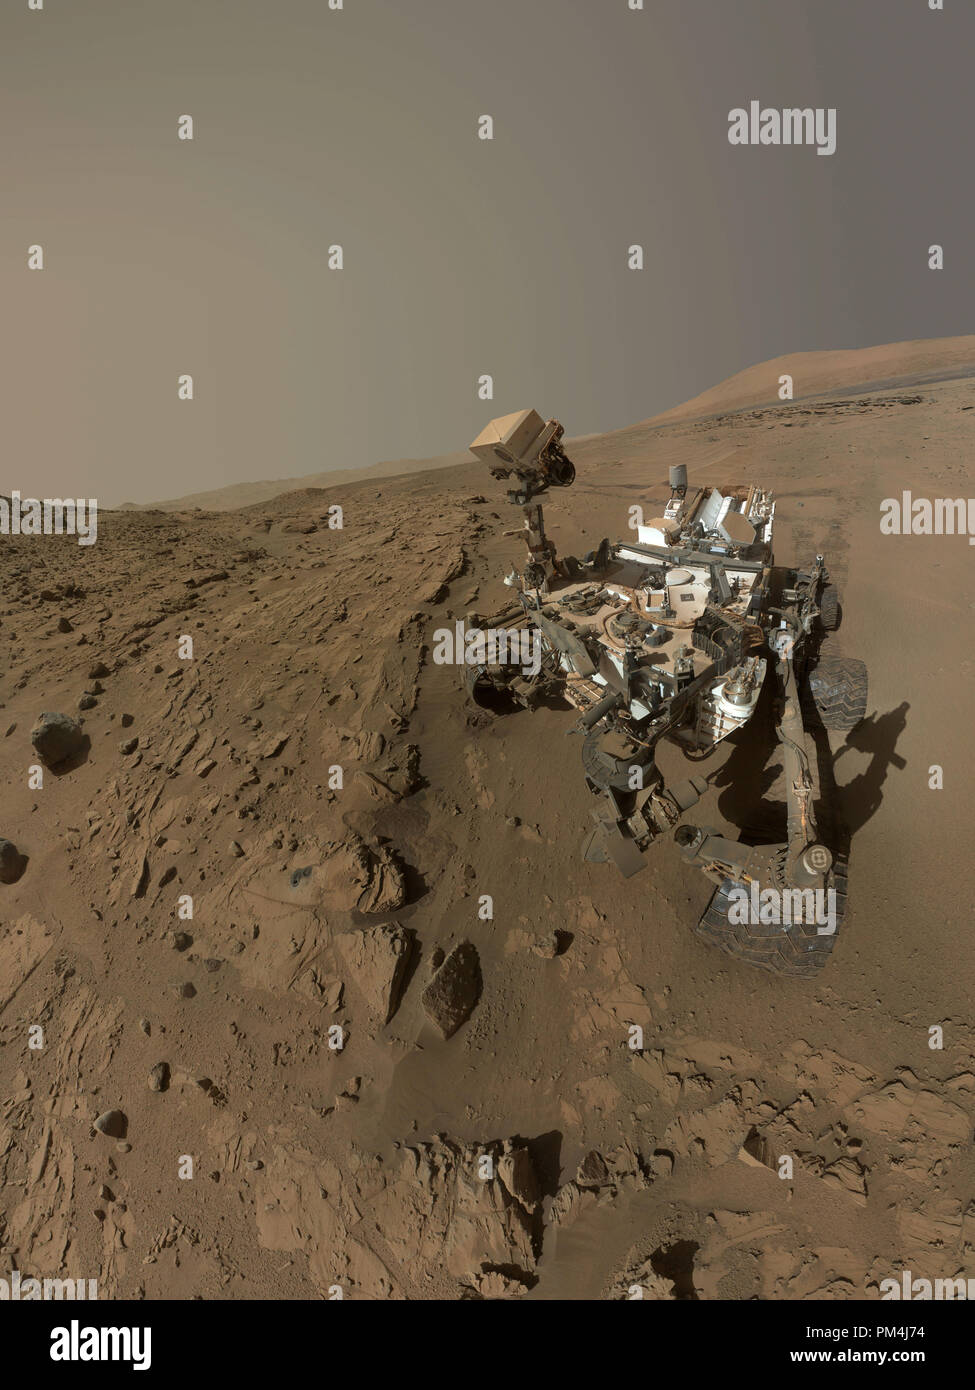 NASA's Curiosity Mars rover used the camera at the end of its arm in April and May 2014 to take dozens of component images combined into this self-portrait where the rover drilled into a sandstone target called 'Windjana.' The camera is the Mars Hand Lens Imager (MAHLI), which previously recorded portraits of Curiosity at two other important sites during the mission: 'Rock Nest' and 'John Klein'.  File Reference # 1003 576THA Stock Photo